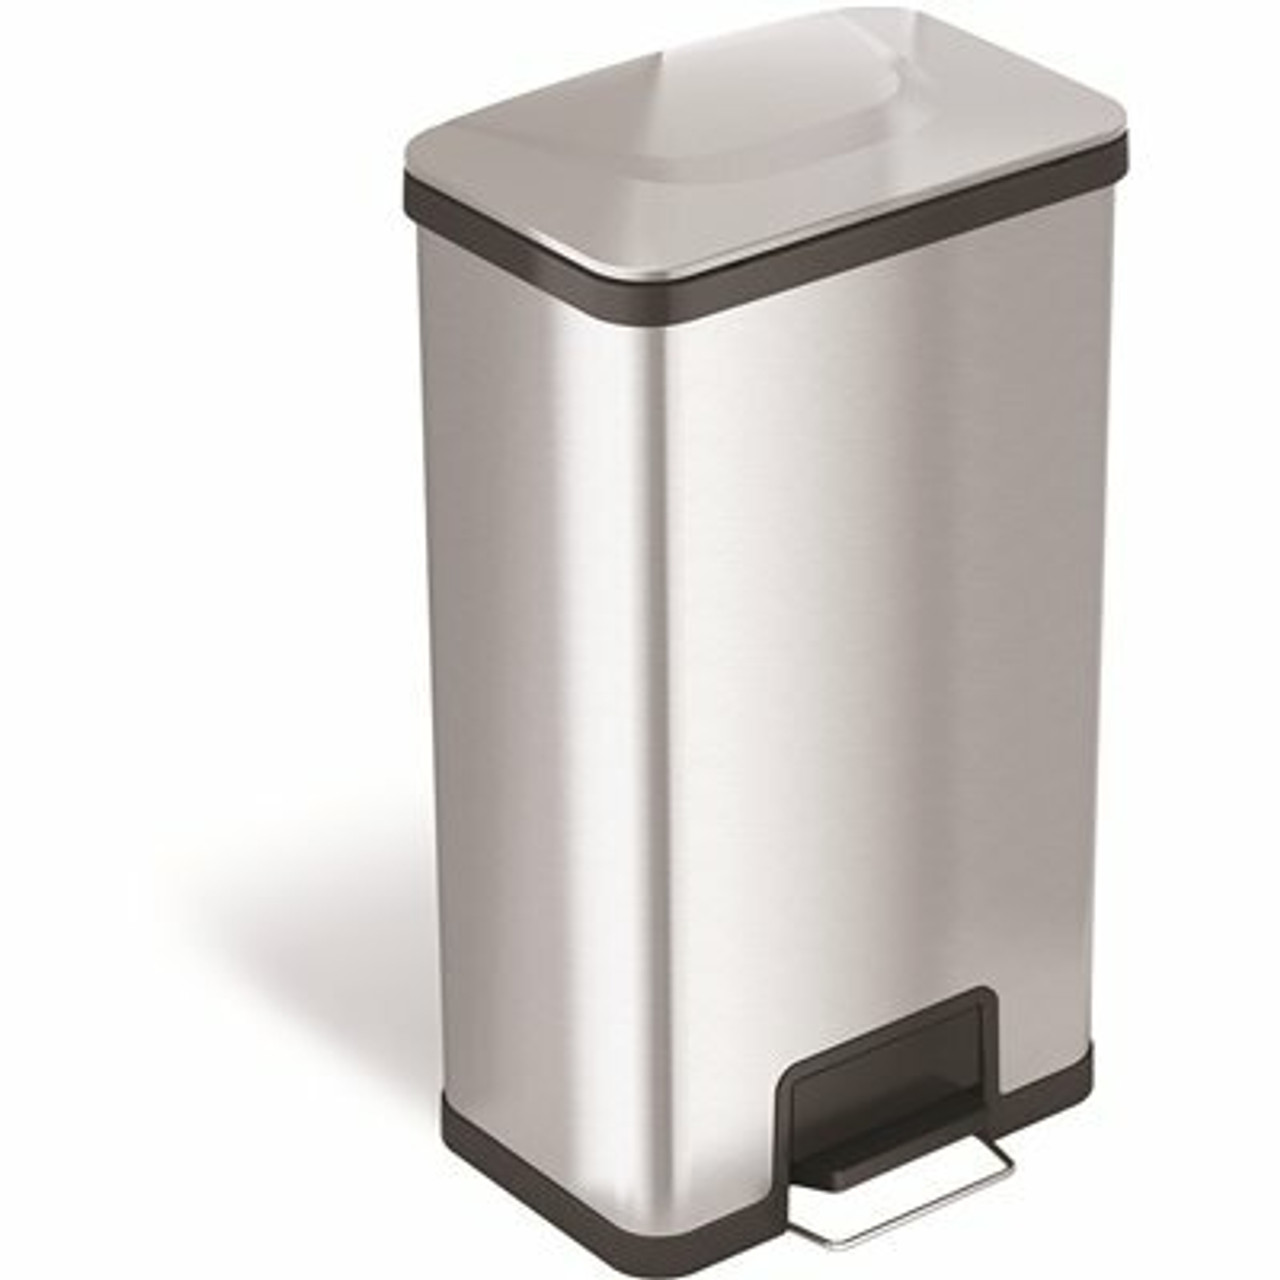 Hls Commercial 18 Gal. Step Stainless Steel Trach Can With Airstep Technology And Odor Filter